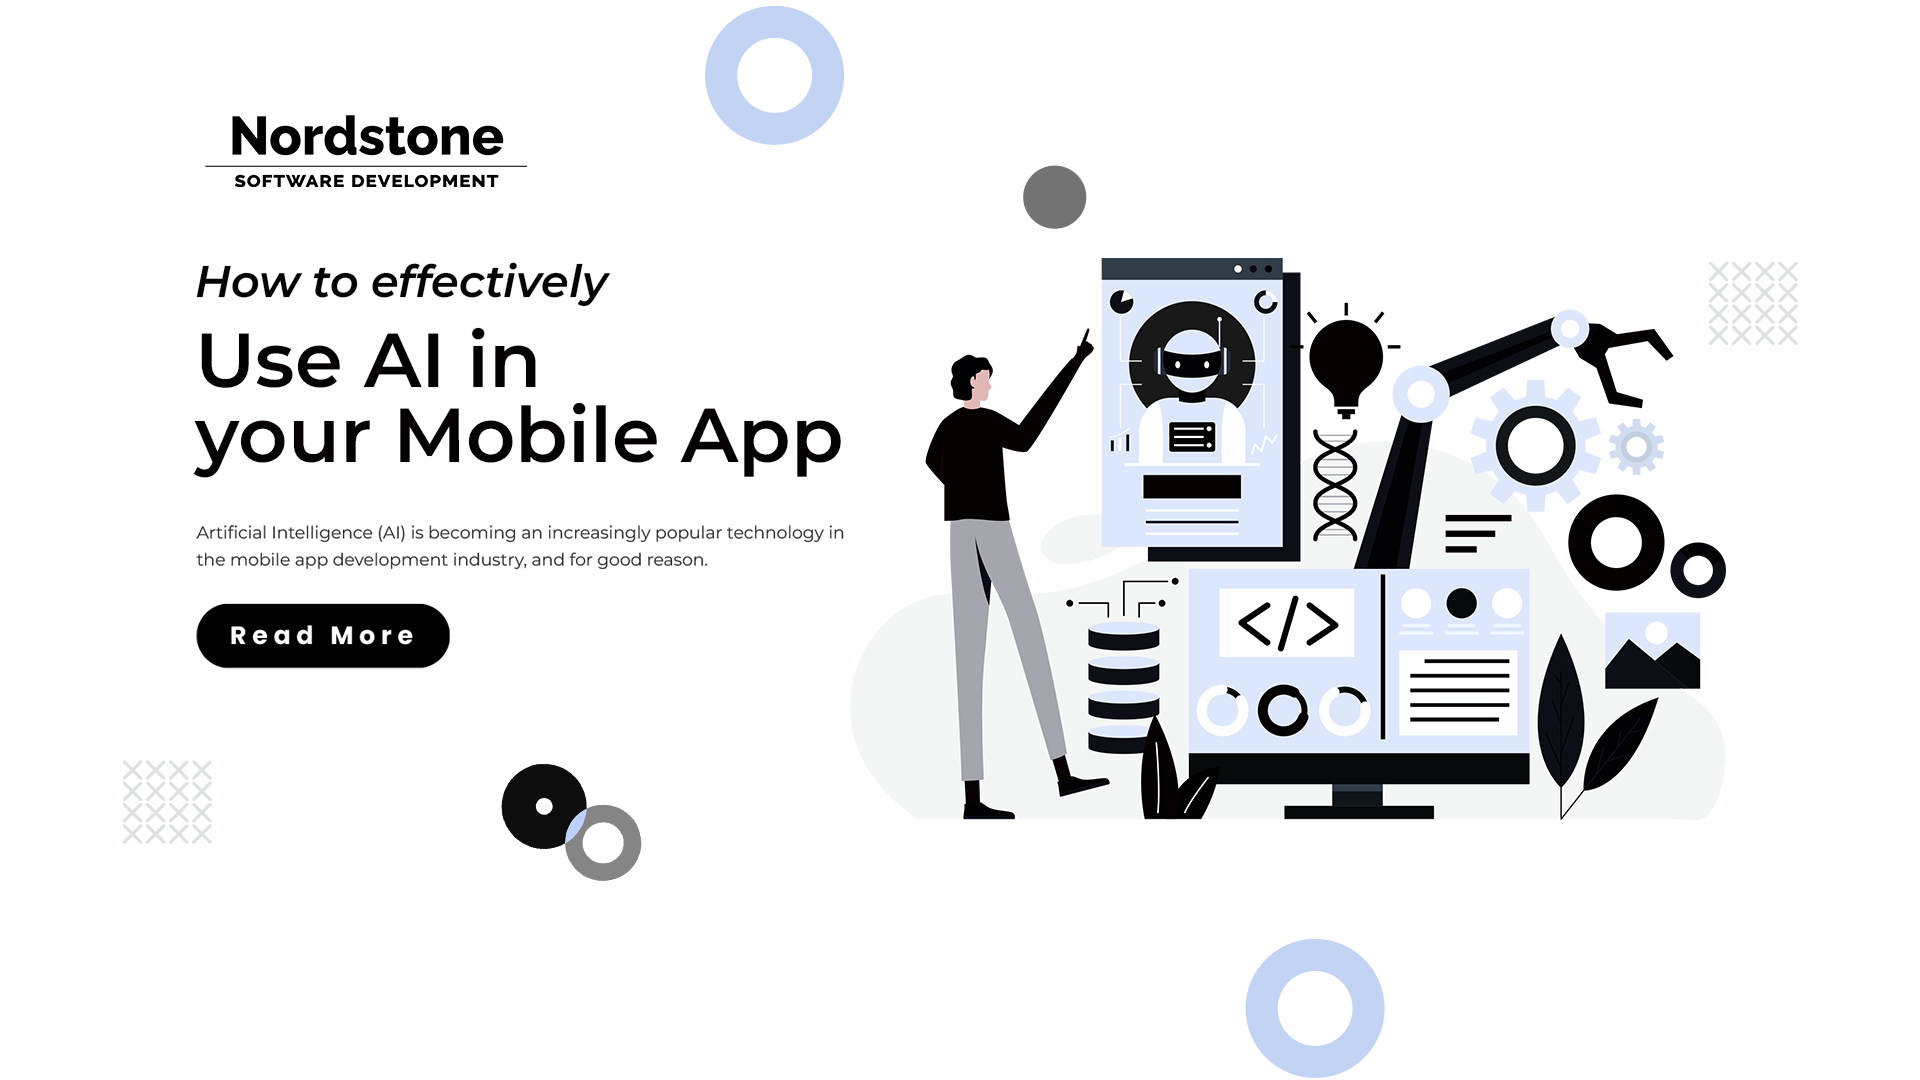 How to achieve Product Market Fit for your mobile app?